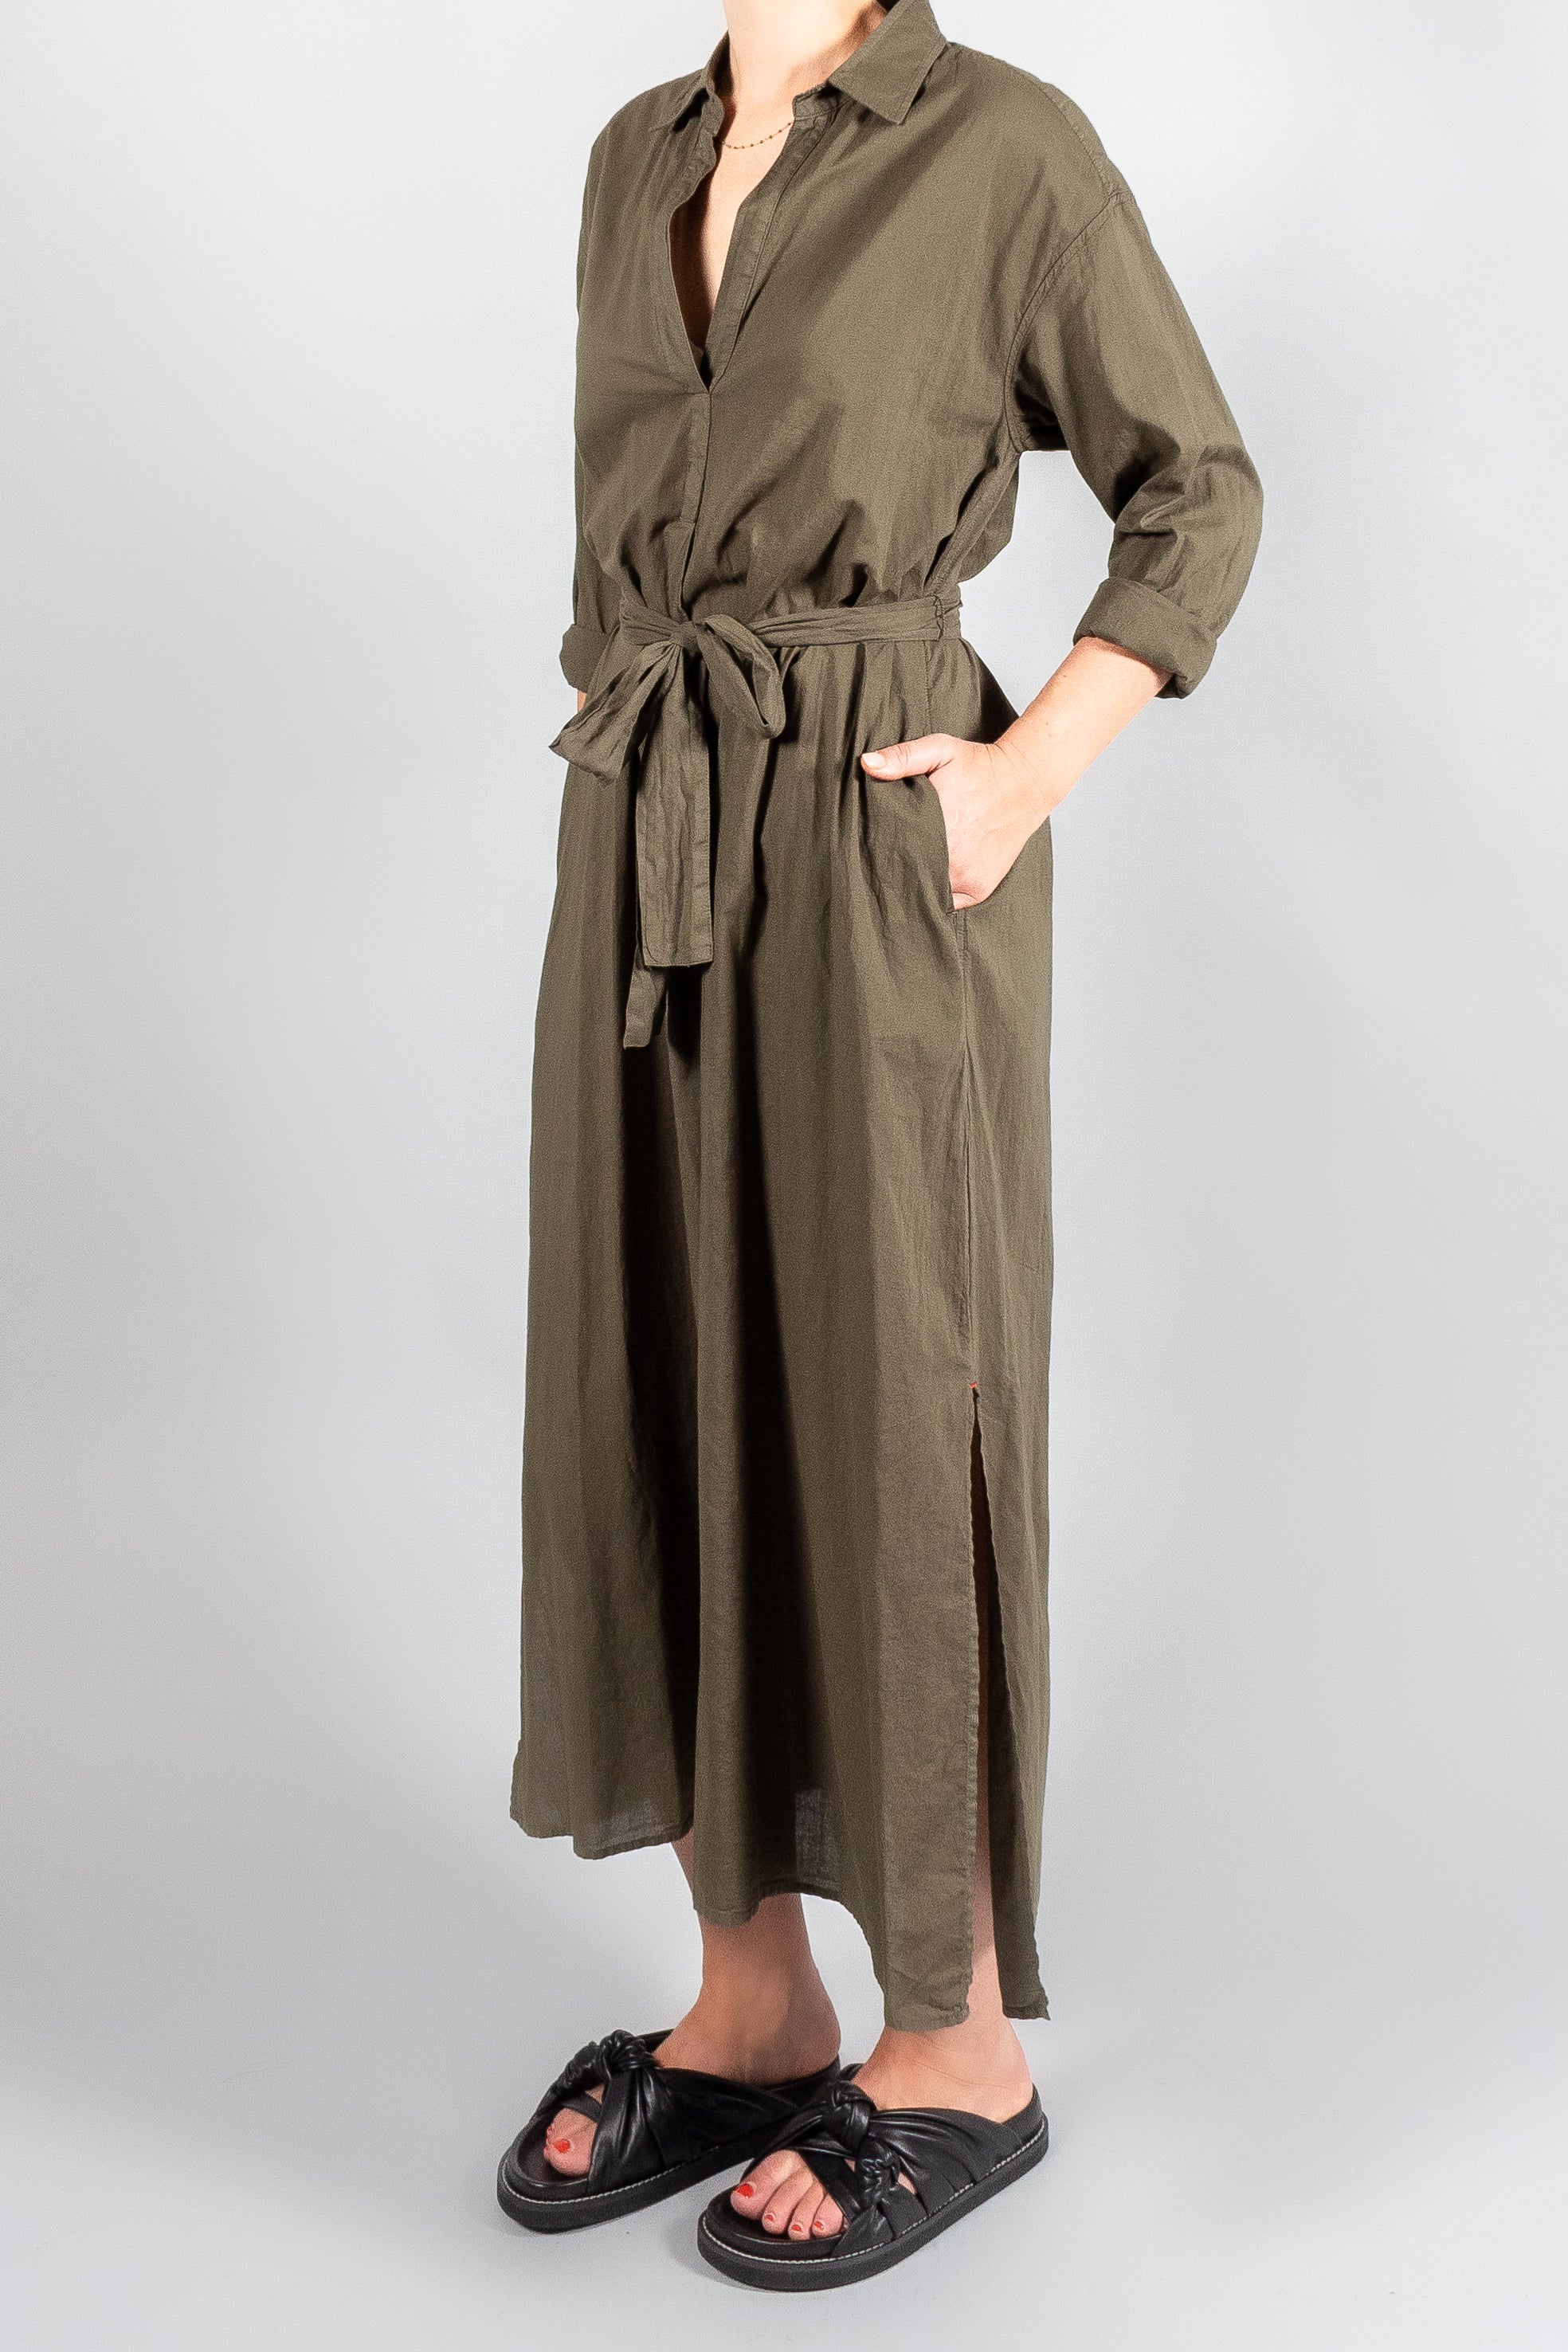 Xirena Hope Dress-Dresses and Jumpsuits-Misch-Vancouver-Canada